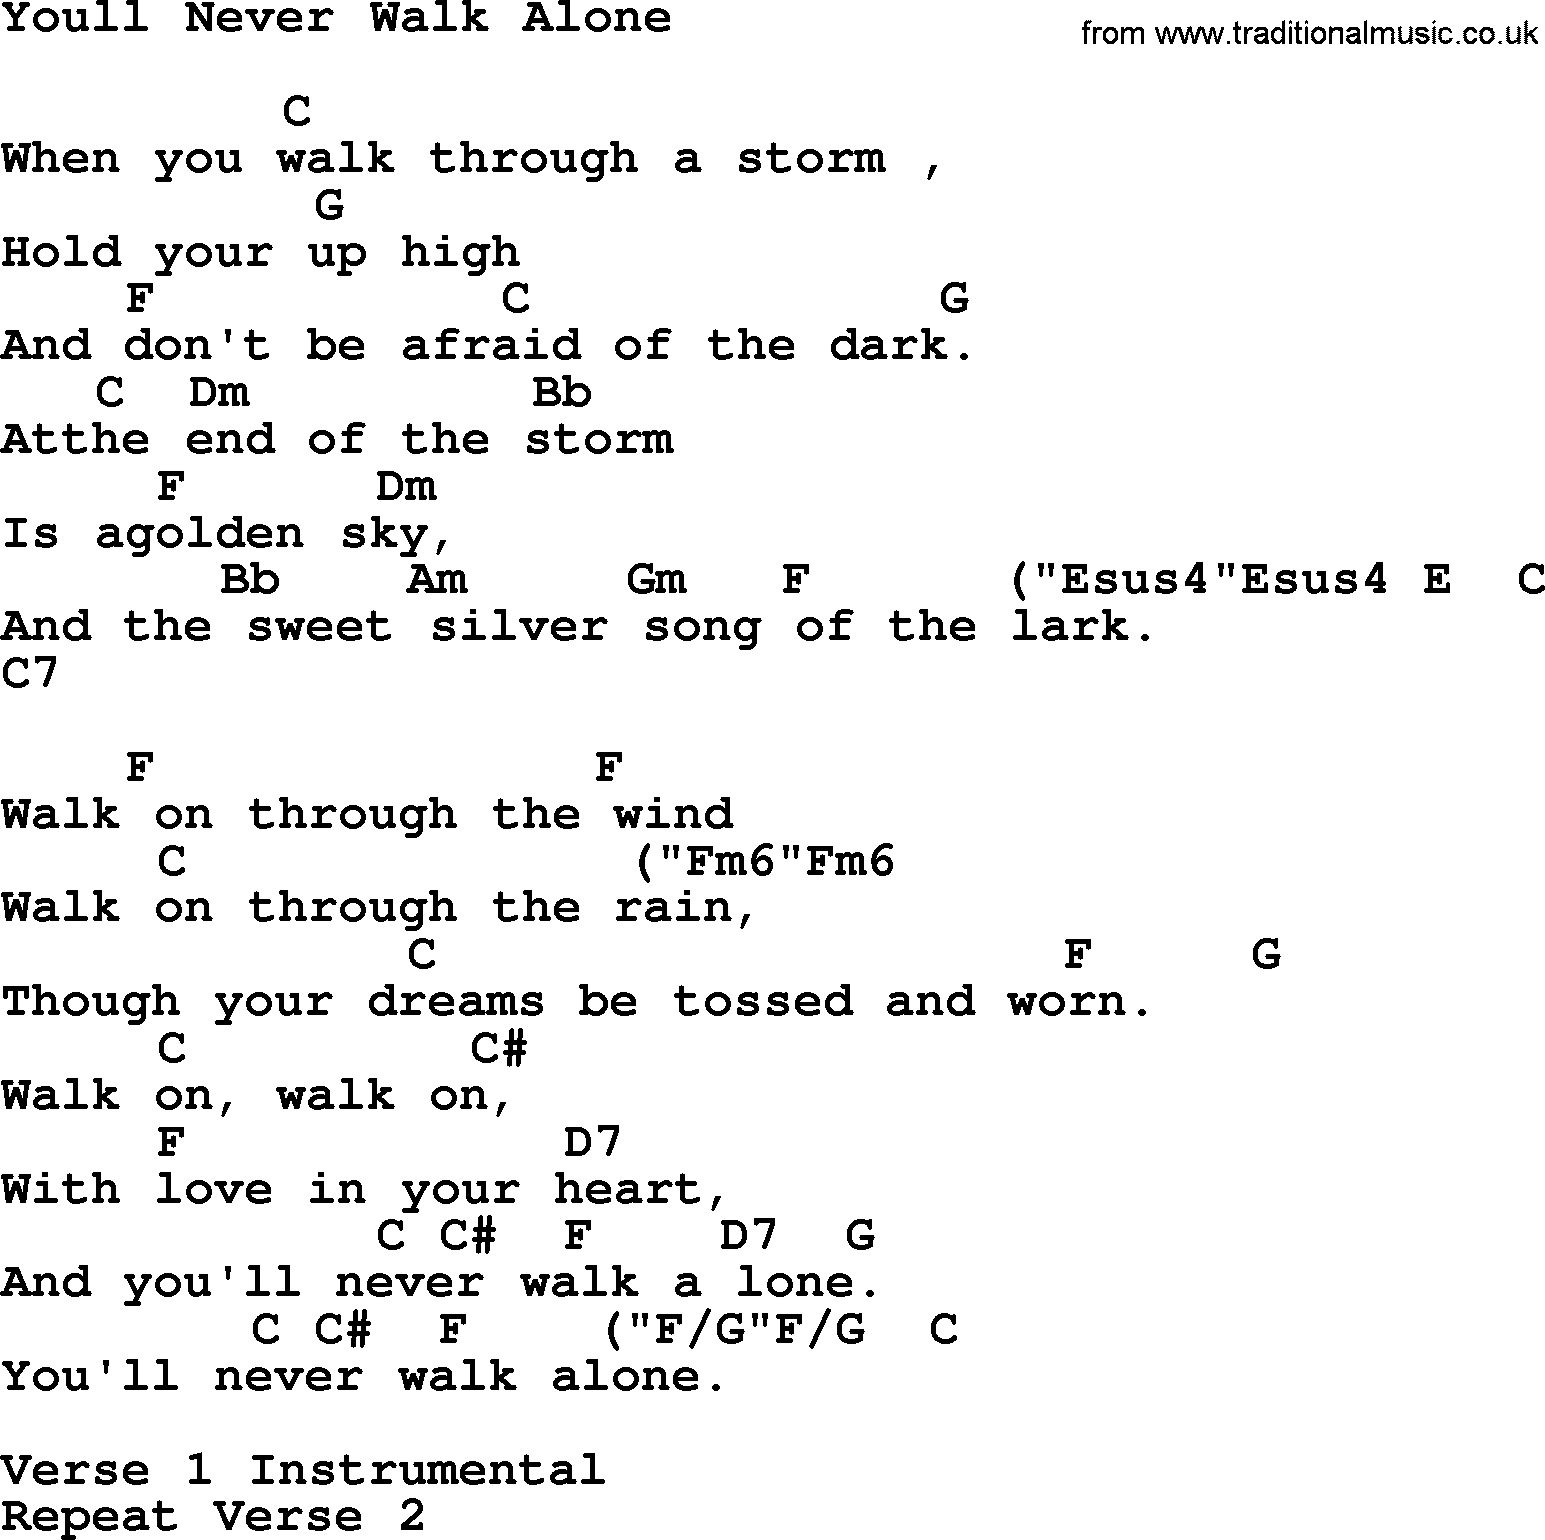 Johnny Cash song: Youll Never Walk Alone, lyrics and chords.